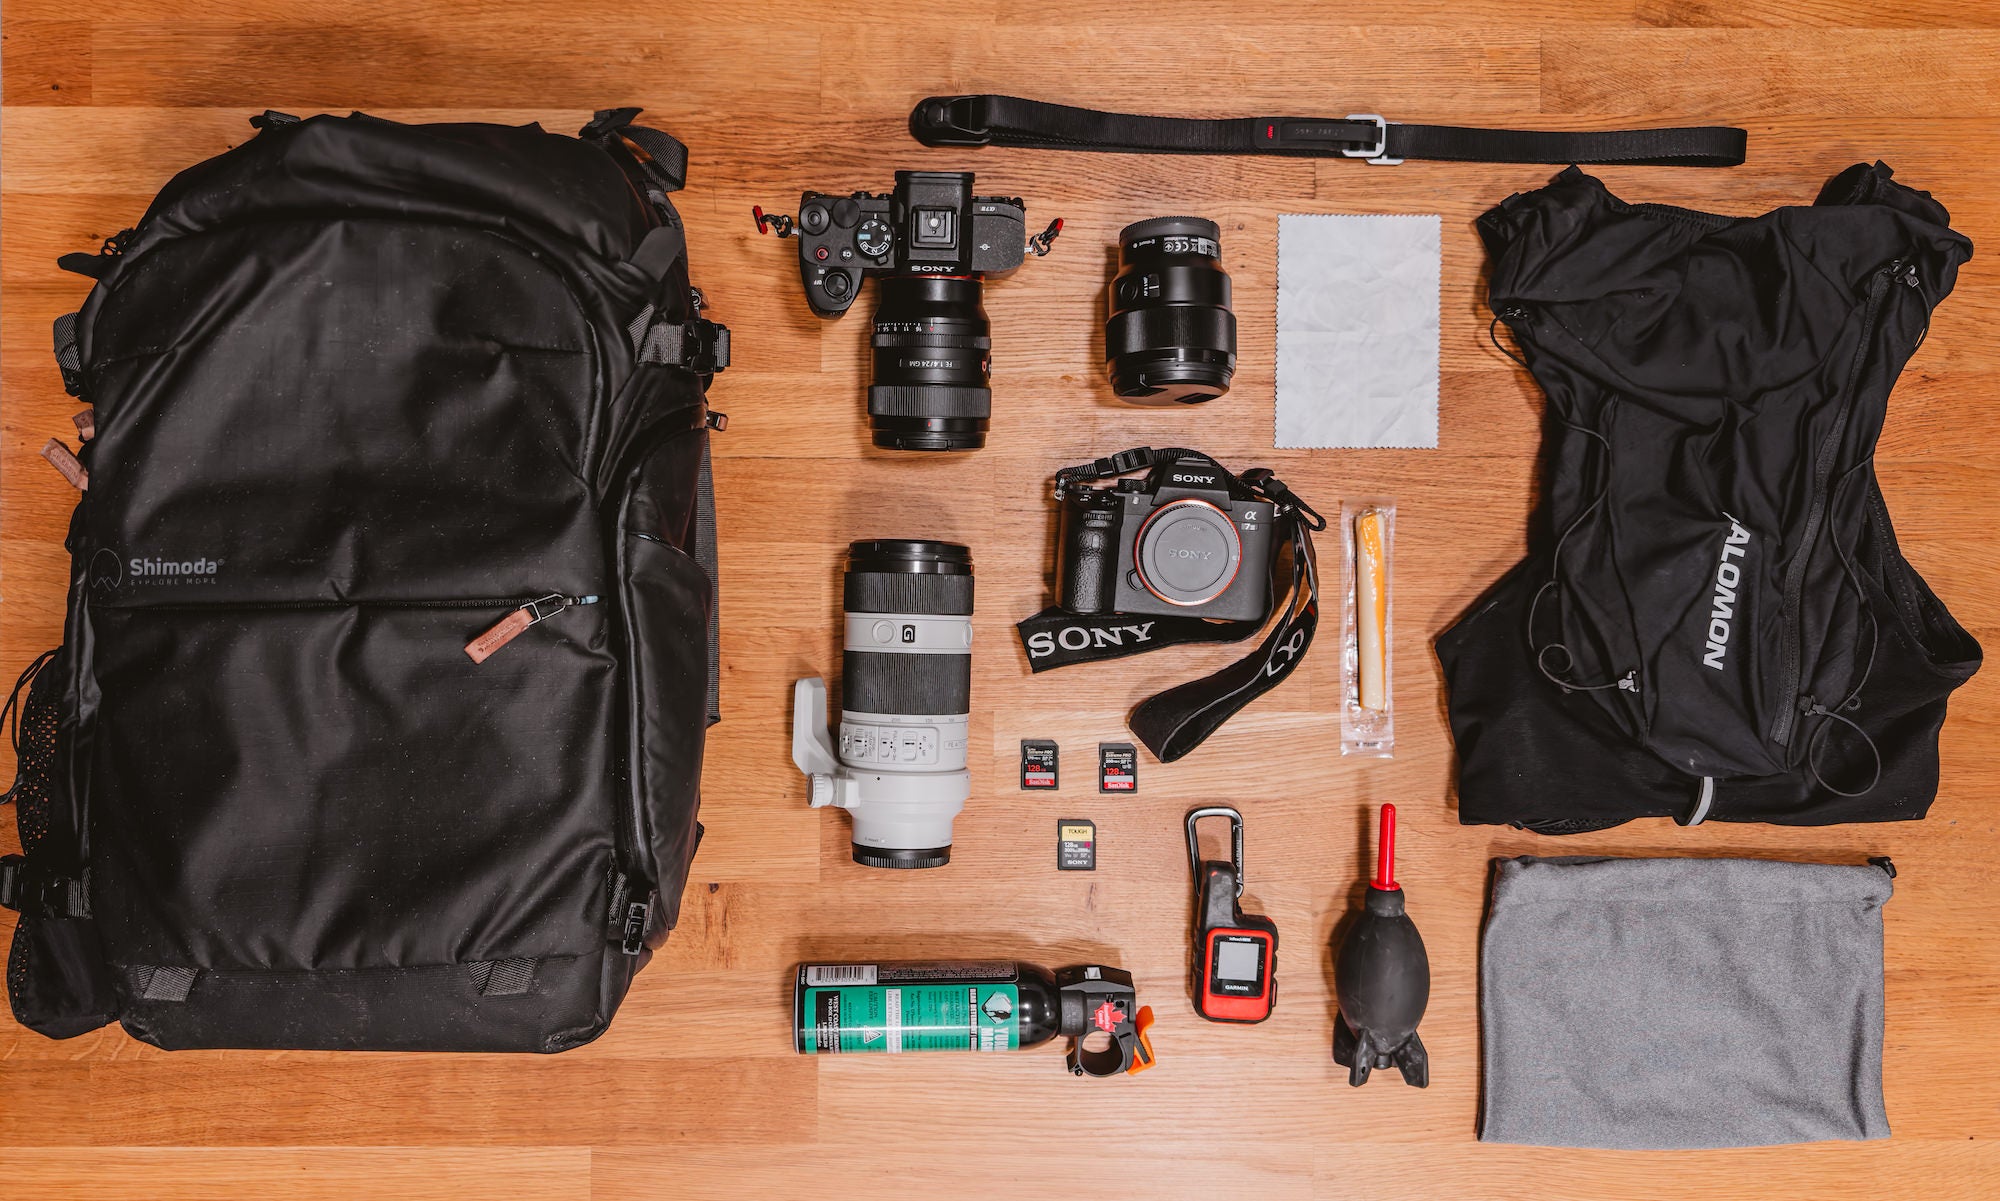 Arletta Fussell's kit for outdoor adventure photography